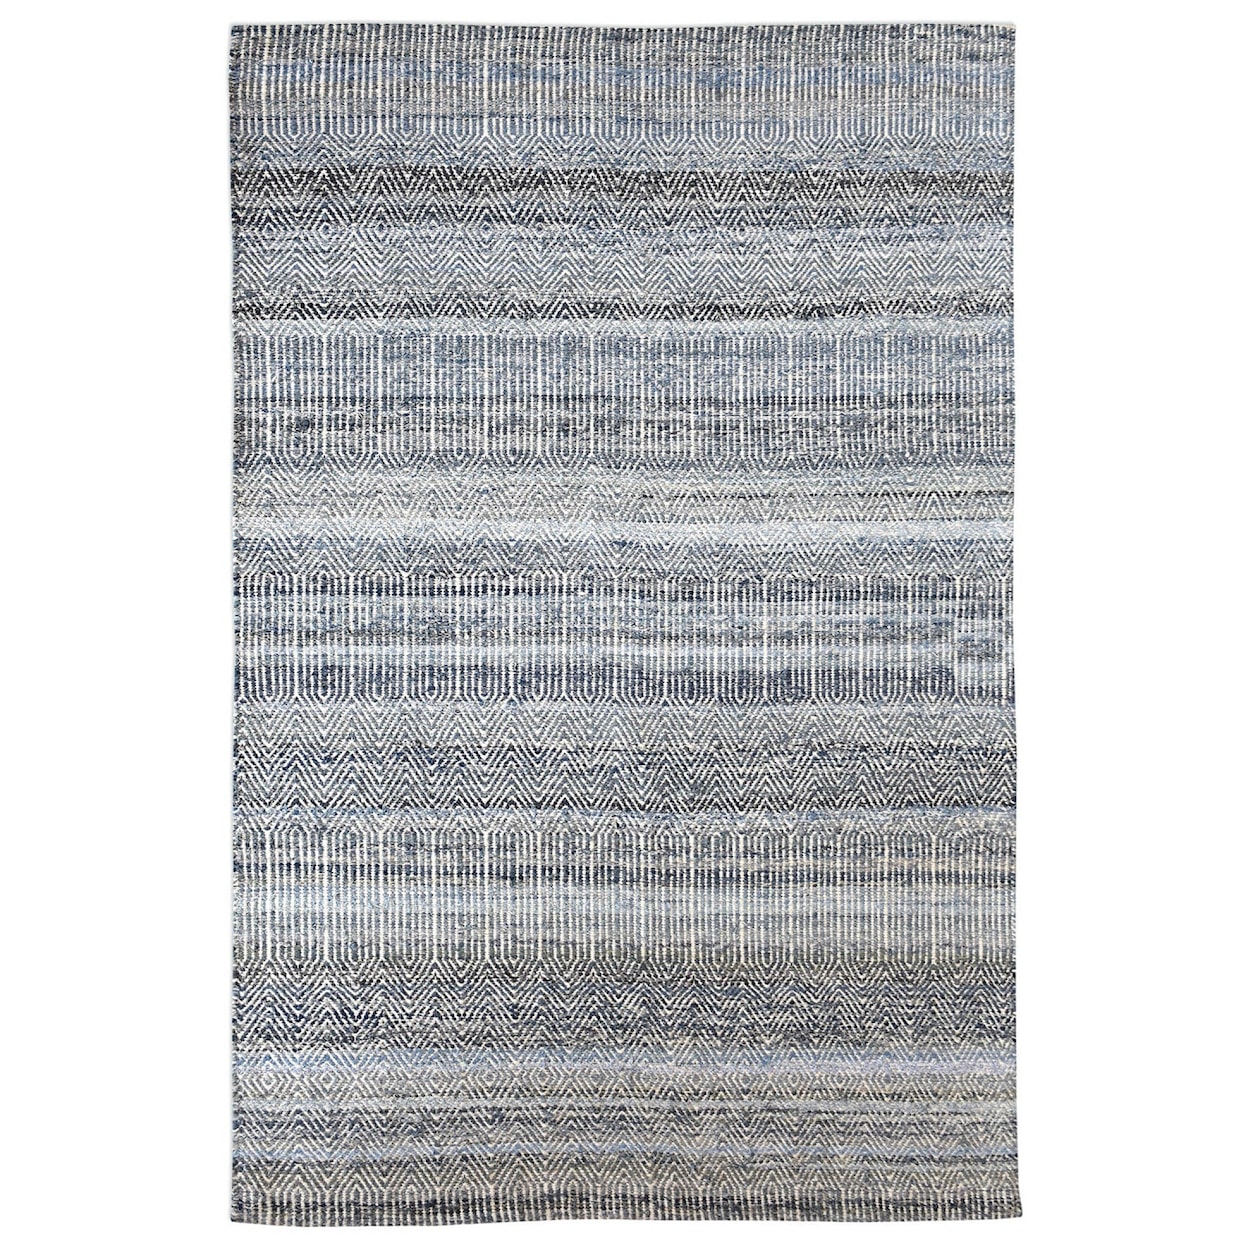 Uttermost Rugs Bolivia Blue 8 x 10 Rug